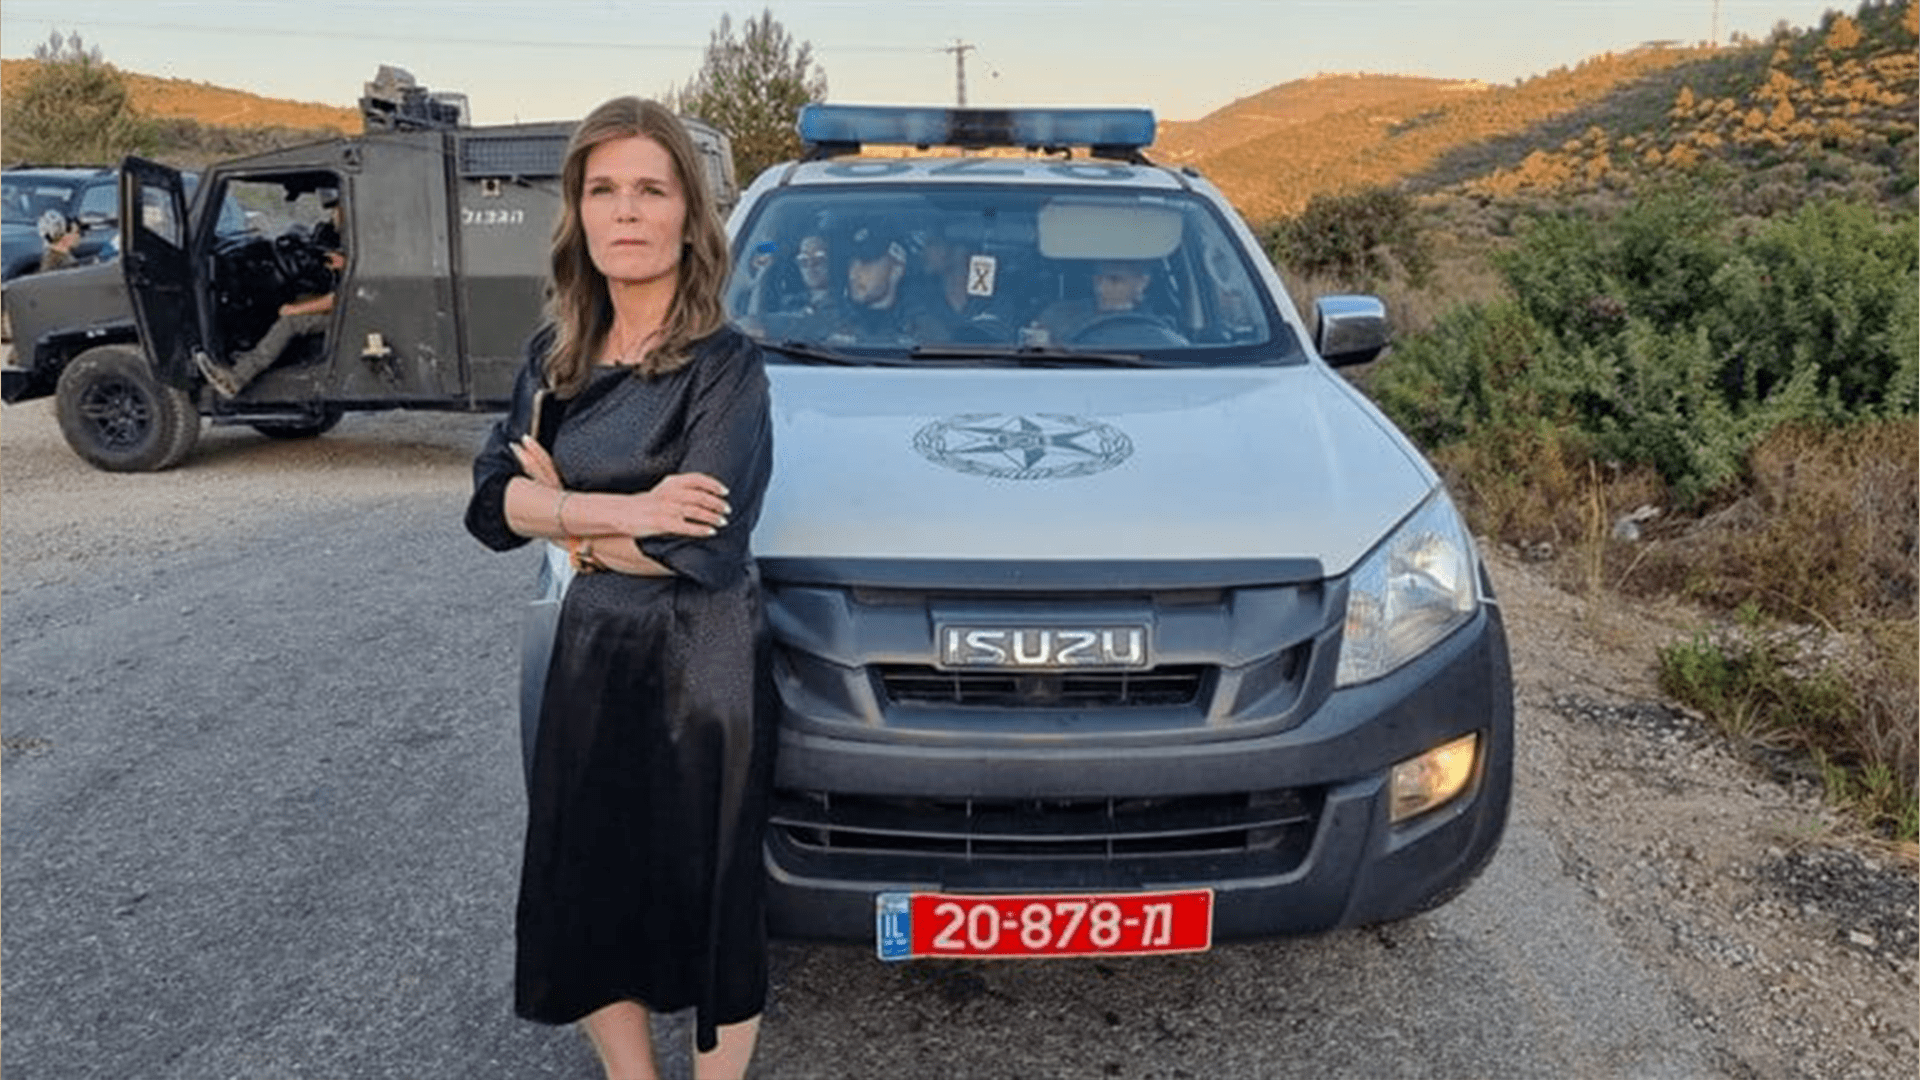 Michal Waldinger stands in front of a police car during an arrest at a settlement, 20 June, 2020 (Twitter)